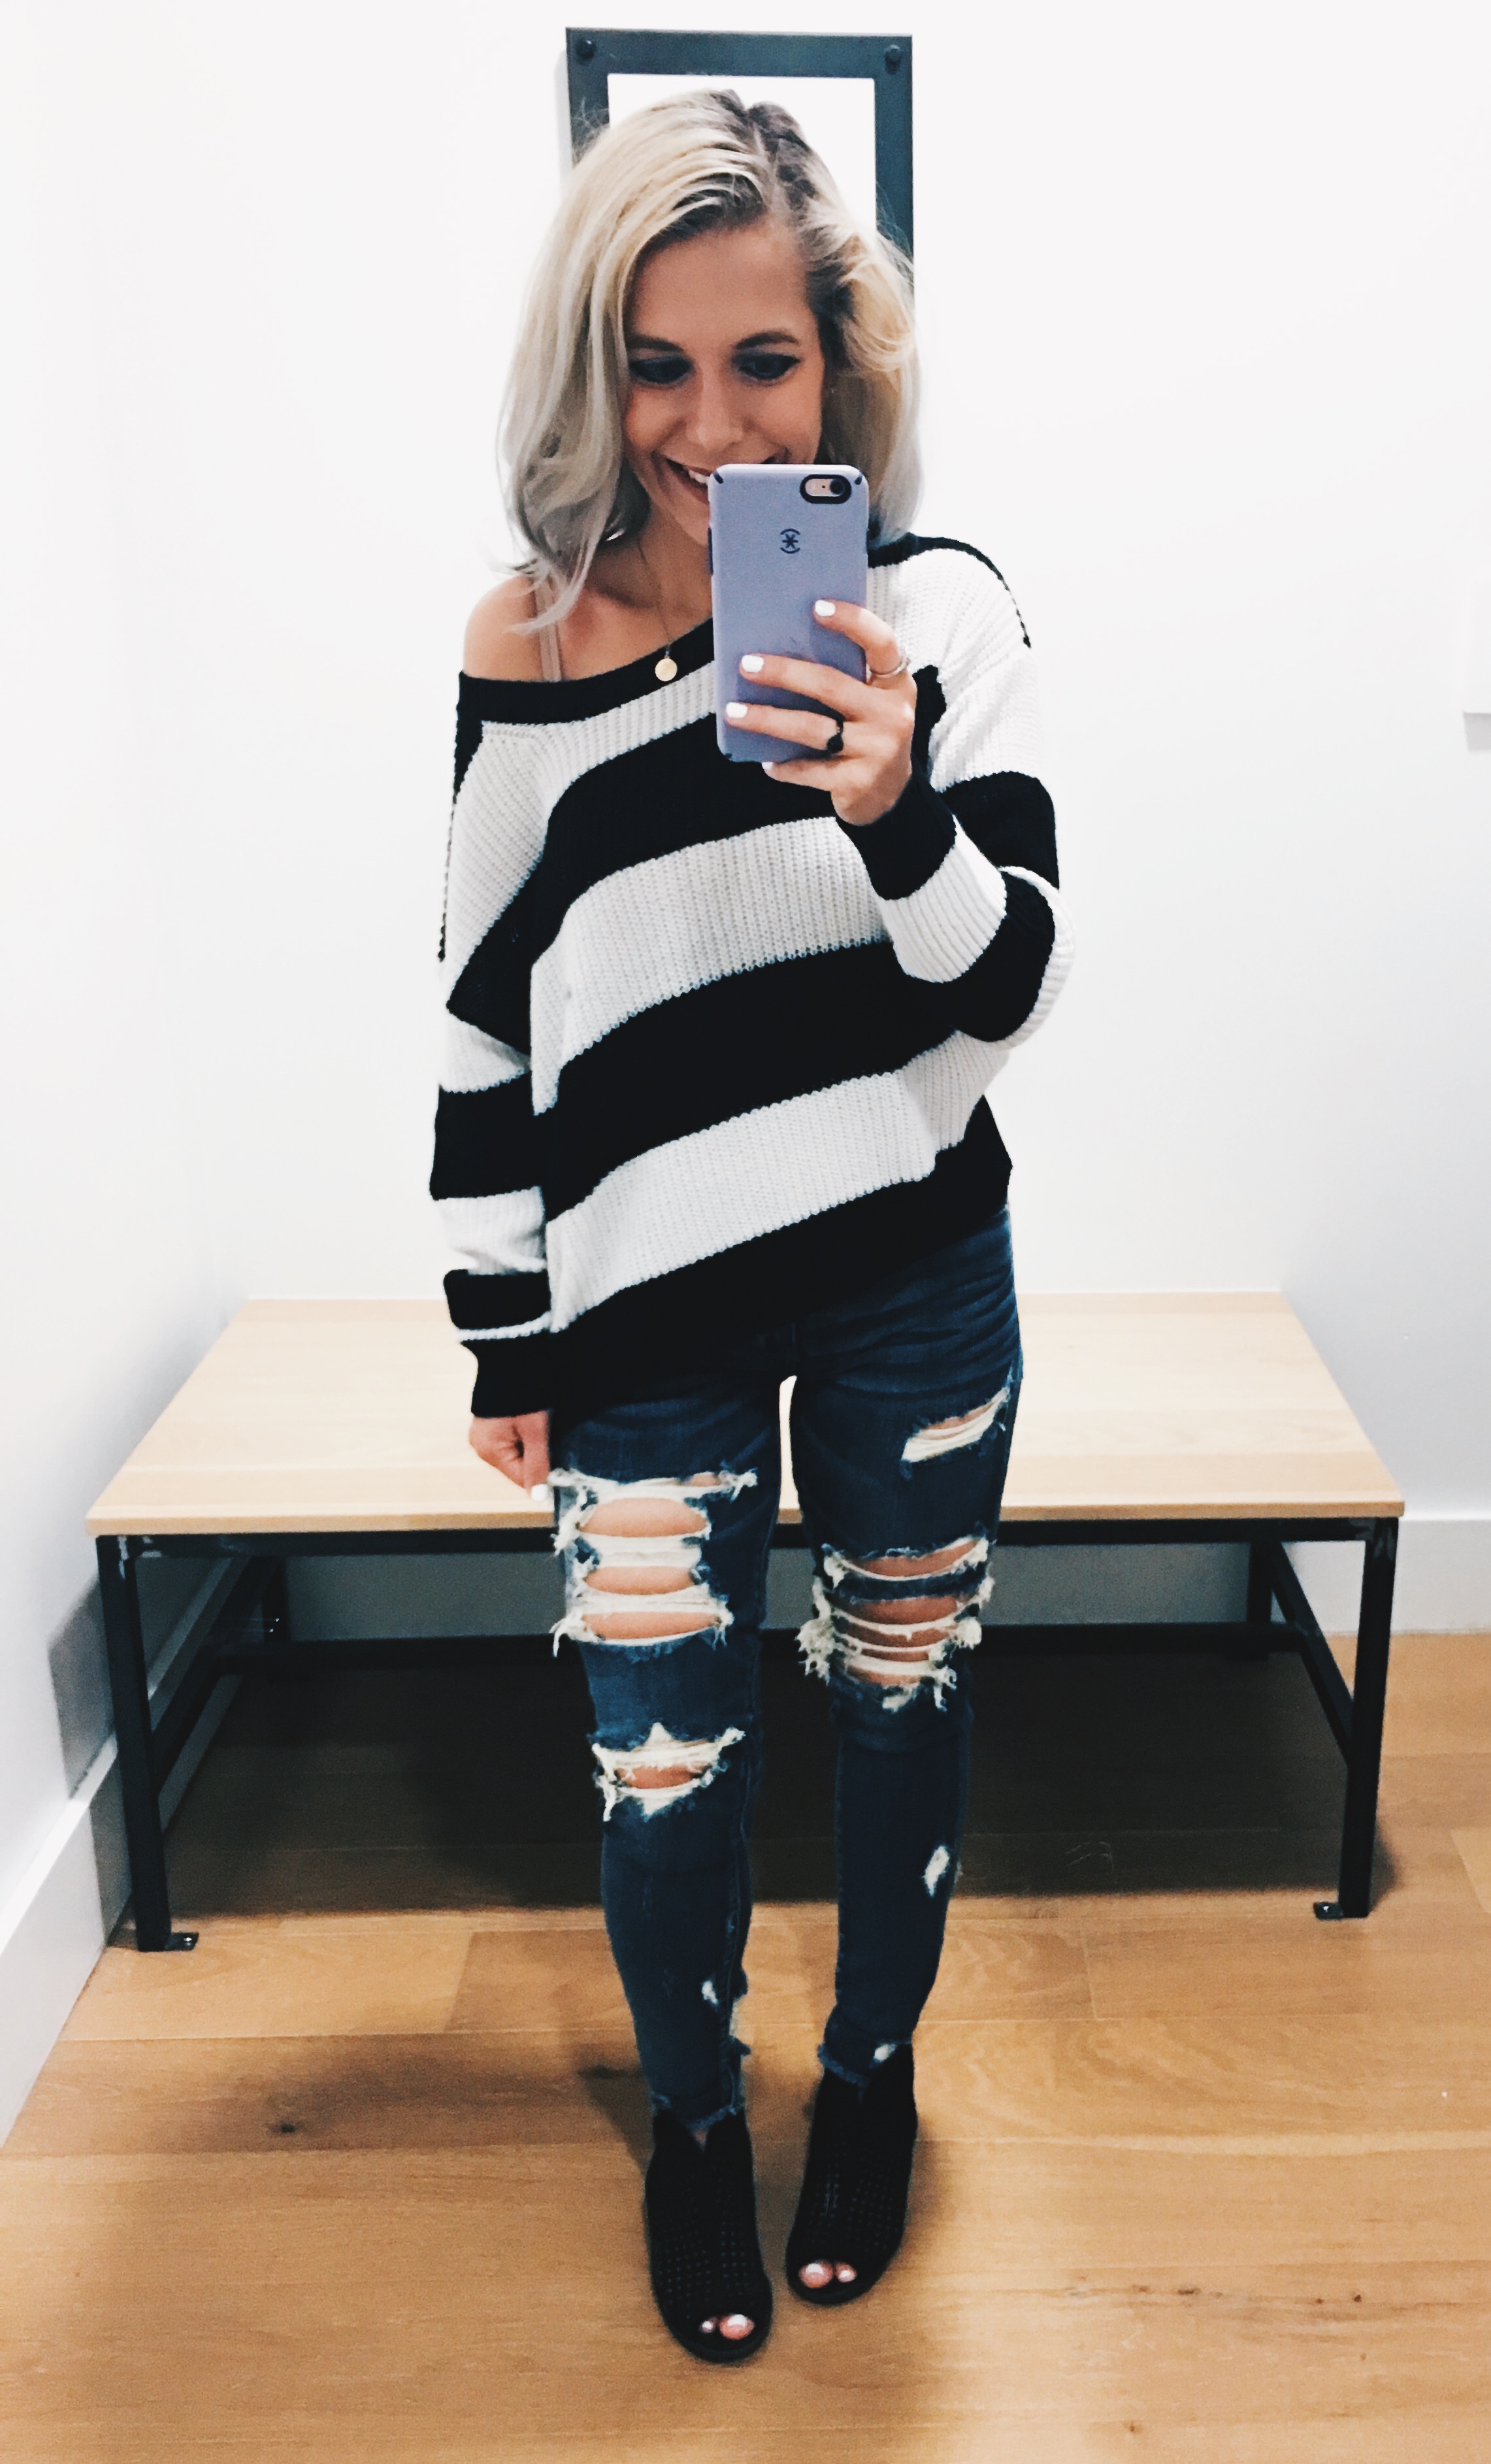 American Eagle Try On Fall 2018 - AE Try On Haul 2018 - American Eagle Try On Session - AE Try On Session - Petite fashion blogger showcases fall 2018 looks from American Eagle, including AE jeans, AE sweaters, and some perfect plaids! #LikeTKit #LTKunder50 #LTKunder100 #FashionBlogger #AExME